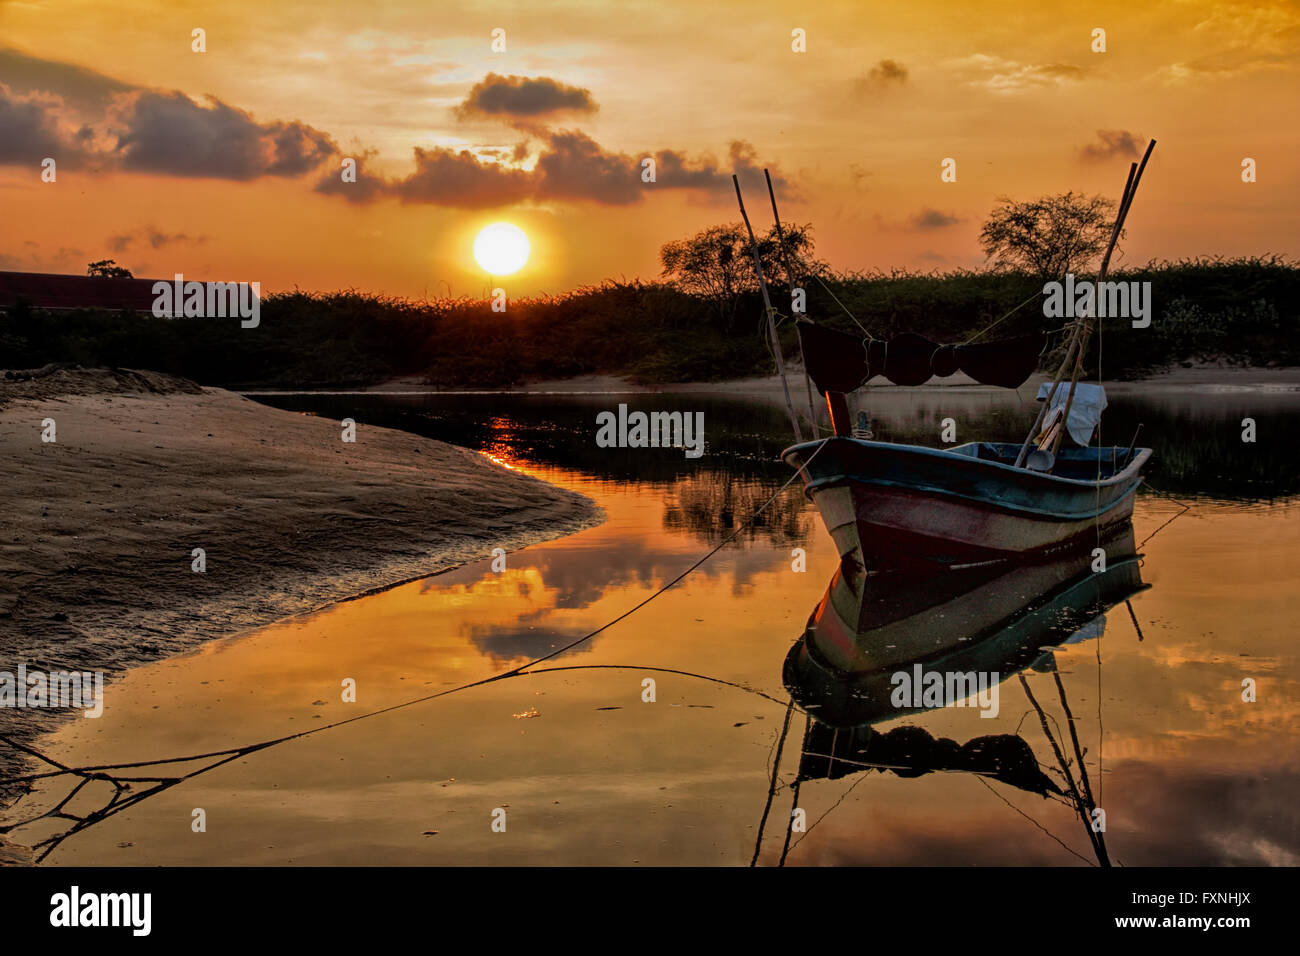 colorful tropical sunset with boat silhouettes in Thailand Stock Photo